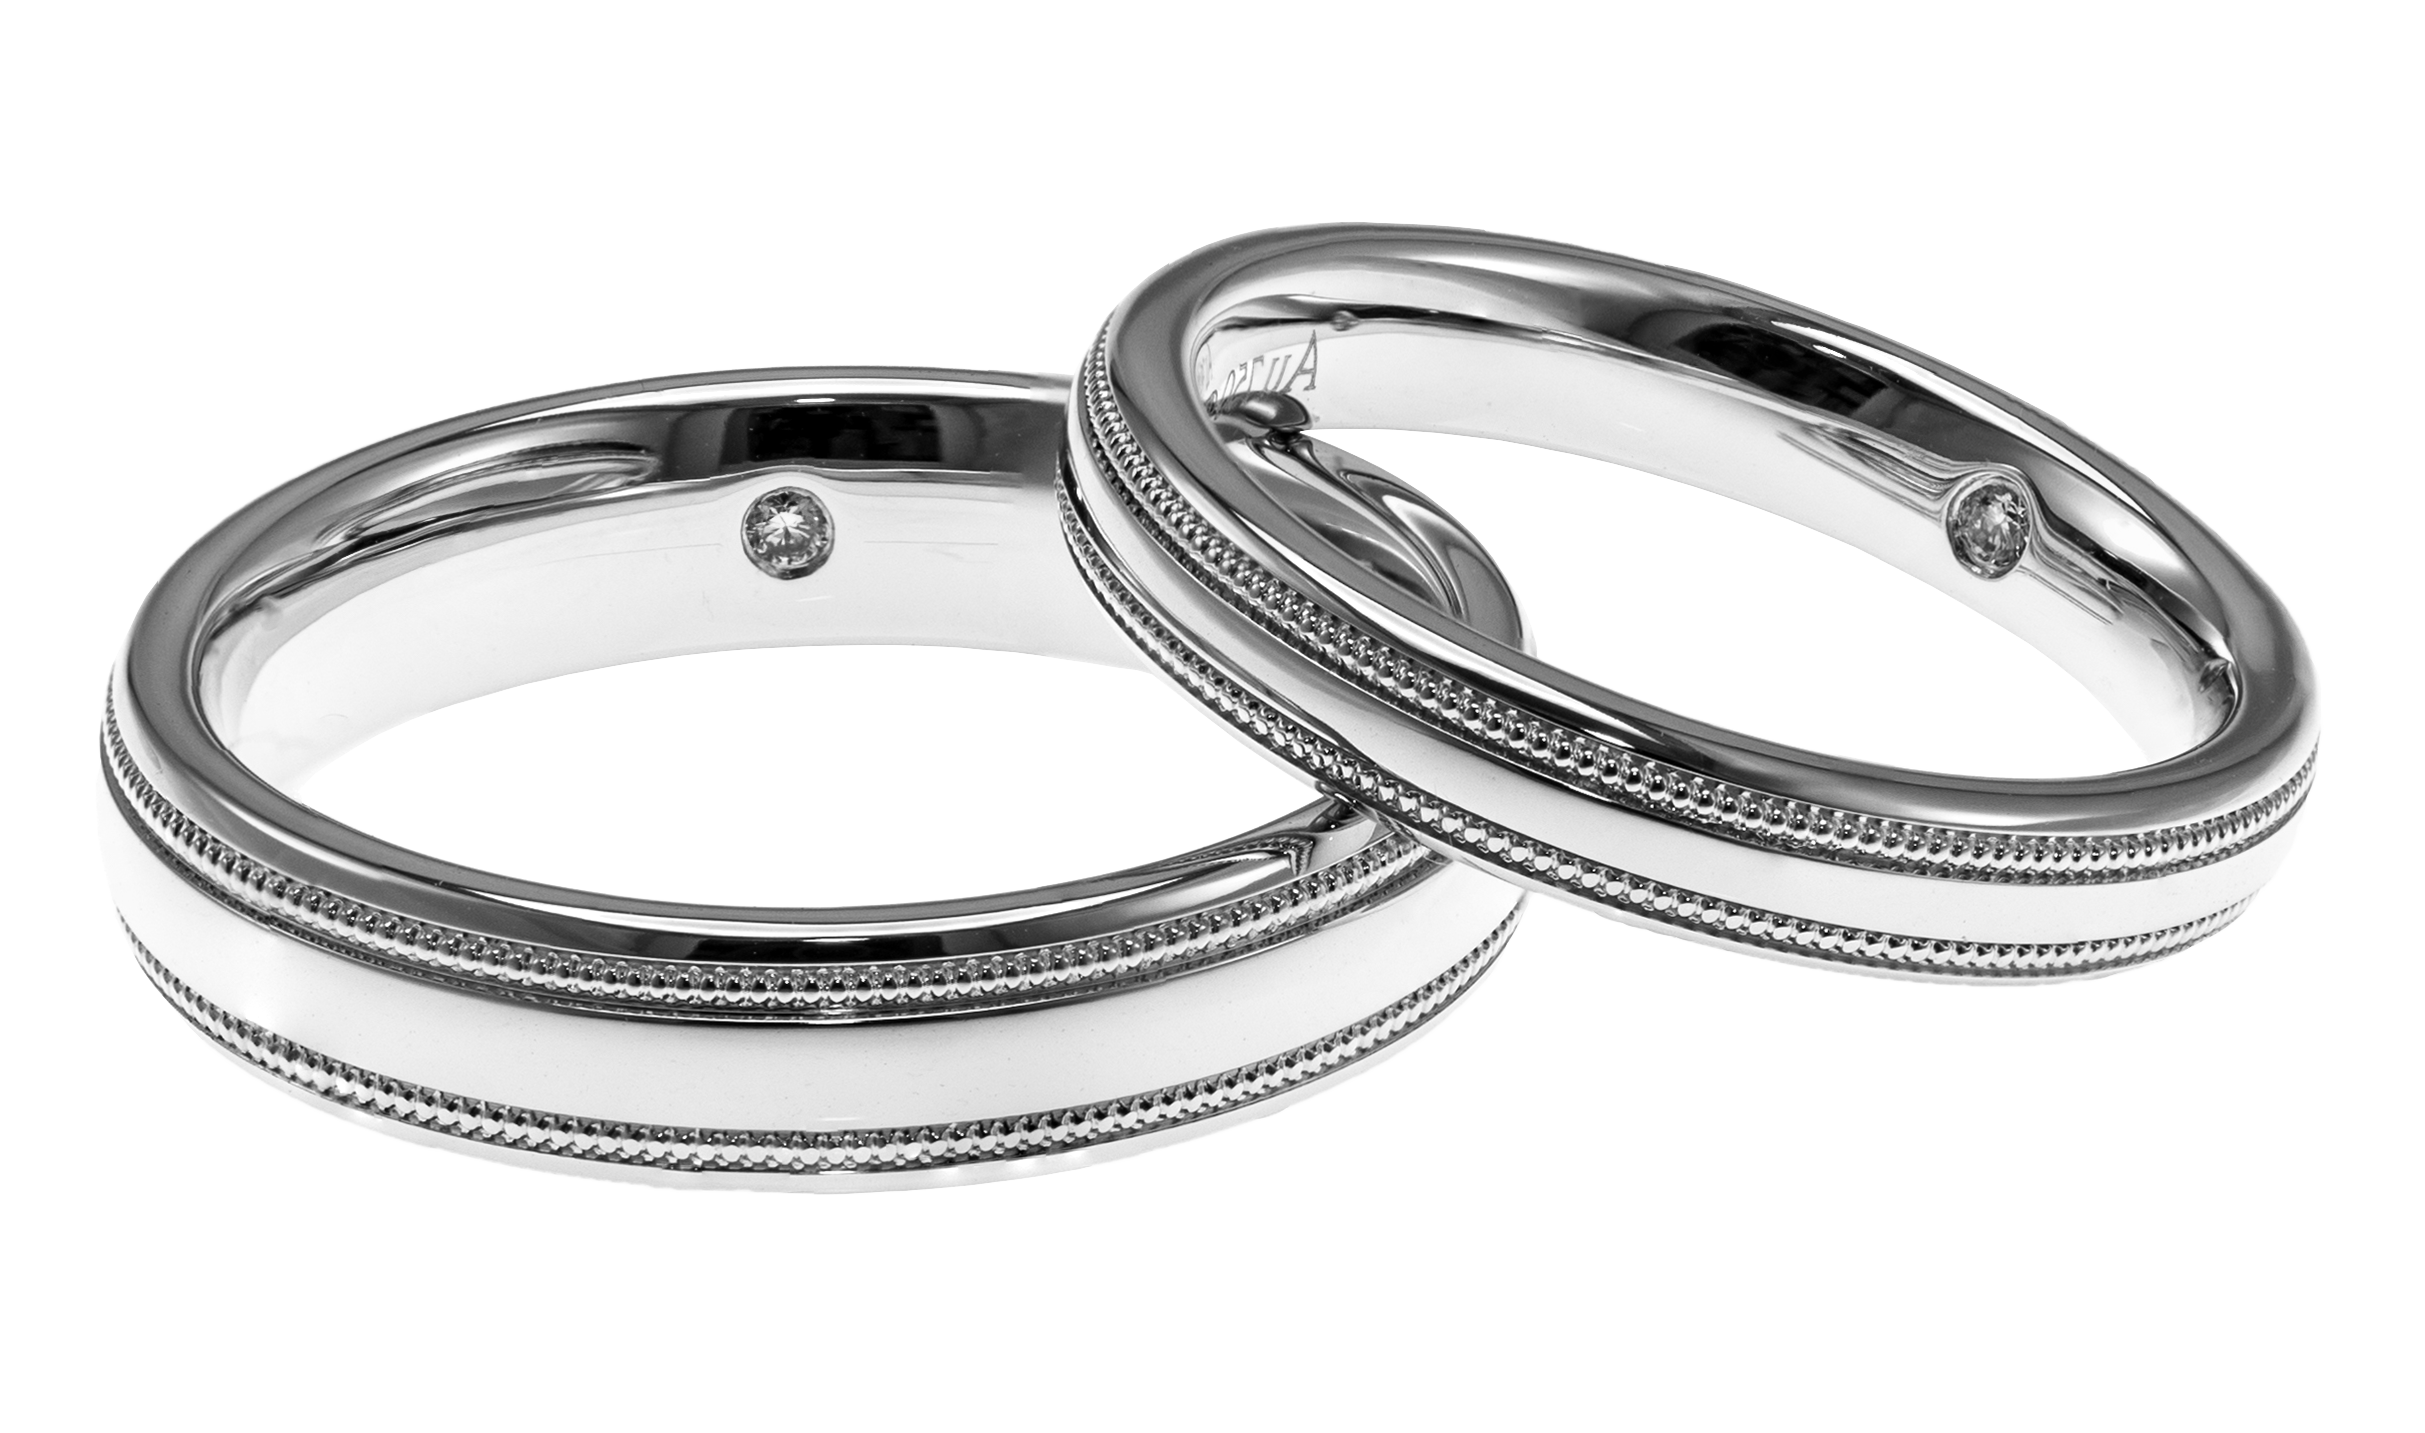 Silver Wedding Rings Png Pic #45270.